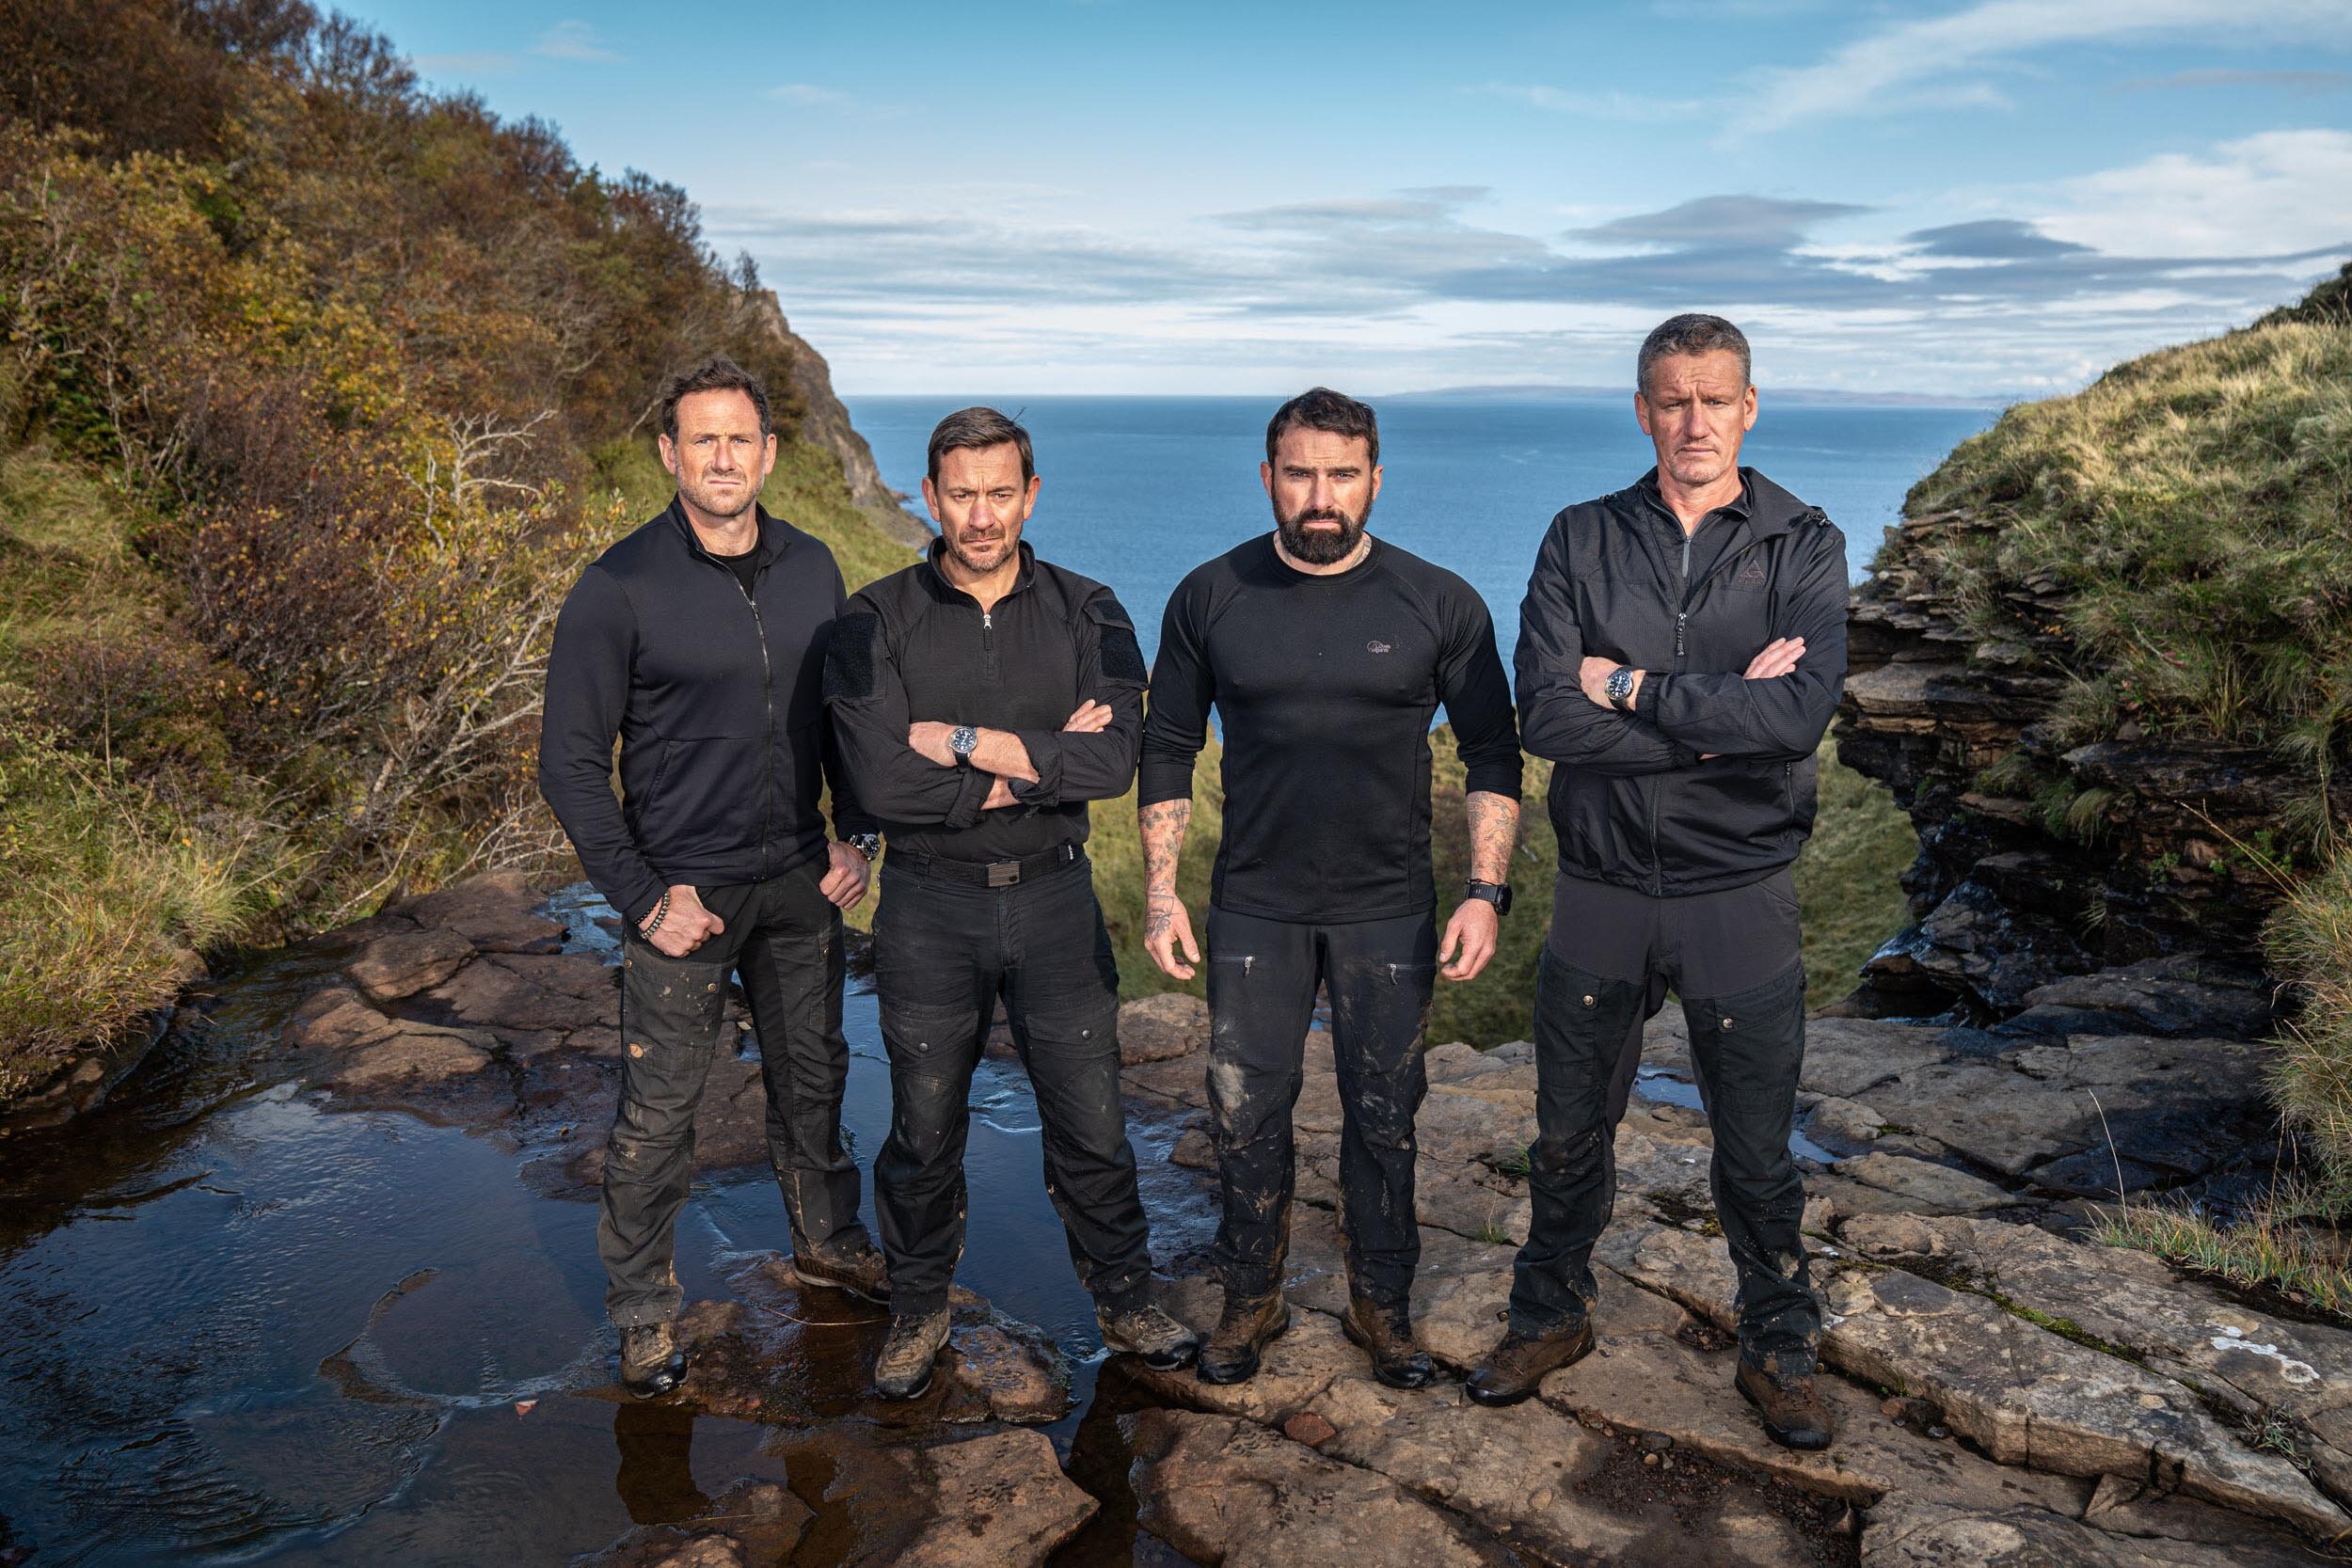  DS Jason Fox, DS Ollie Ollerton, Chief Instructor Ant Middleton, and DS Billy Billingham  Minnow Films / Channel 4 